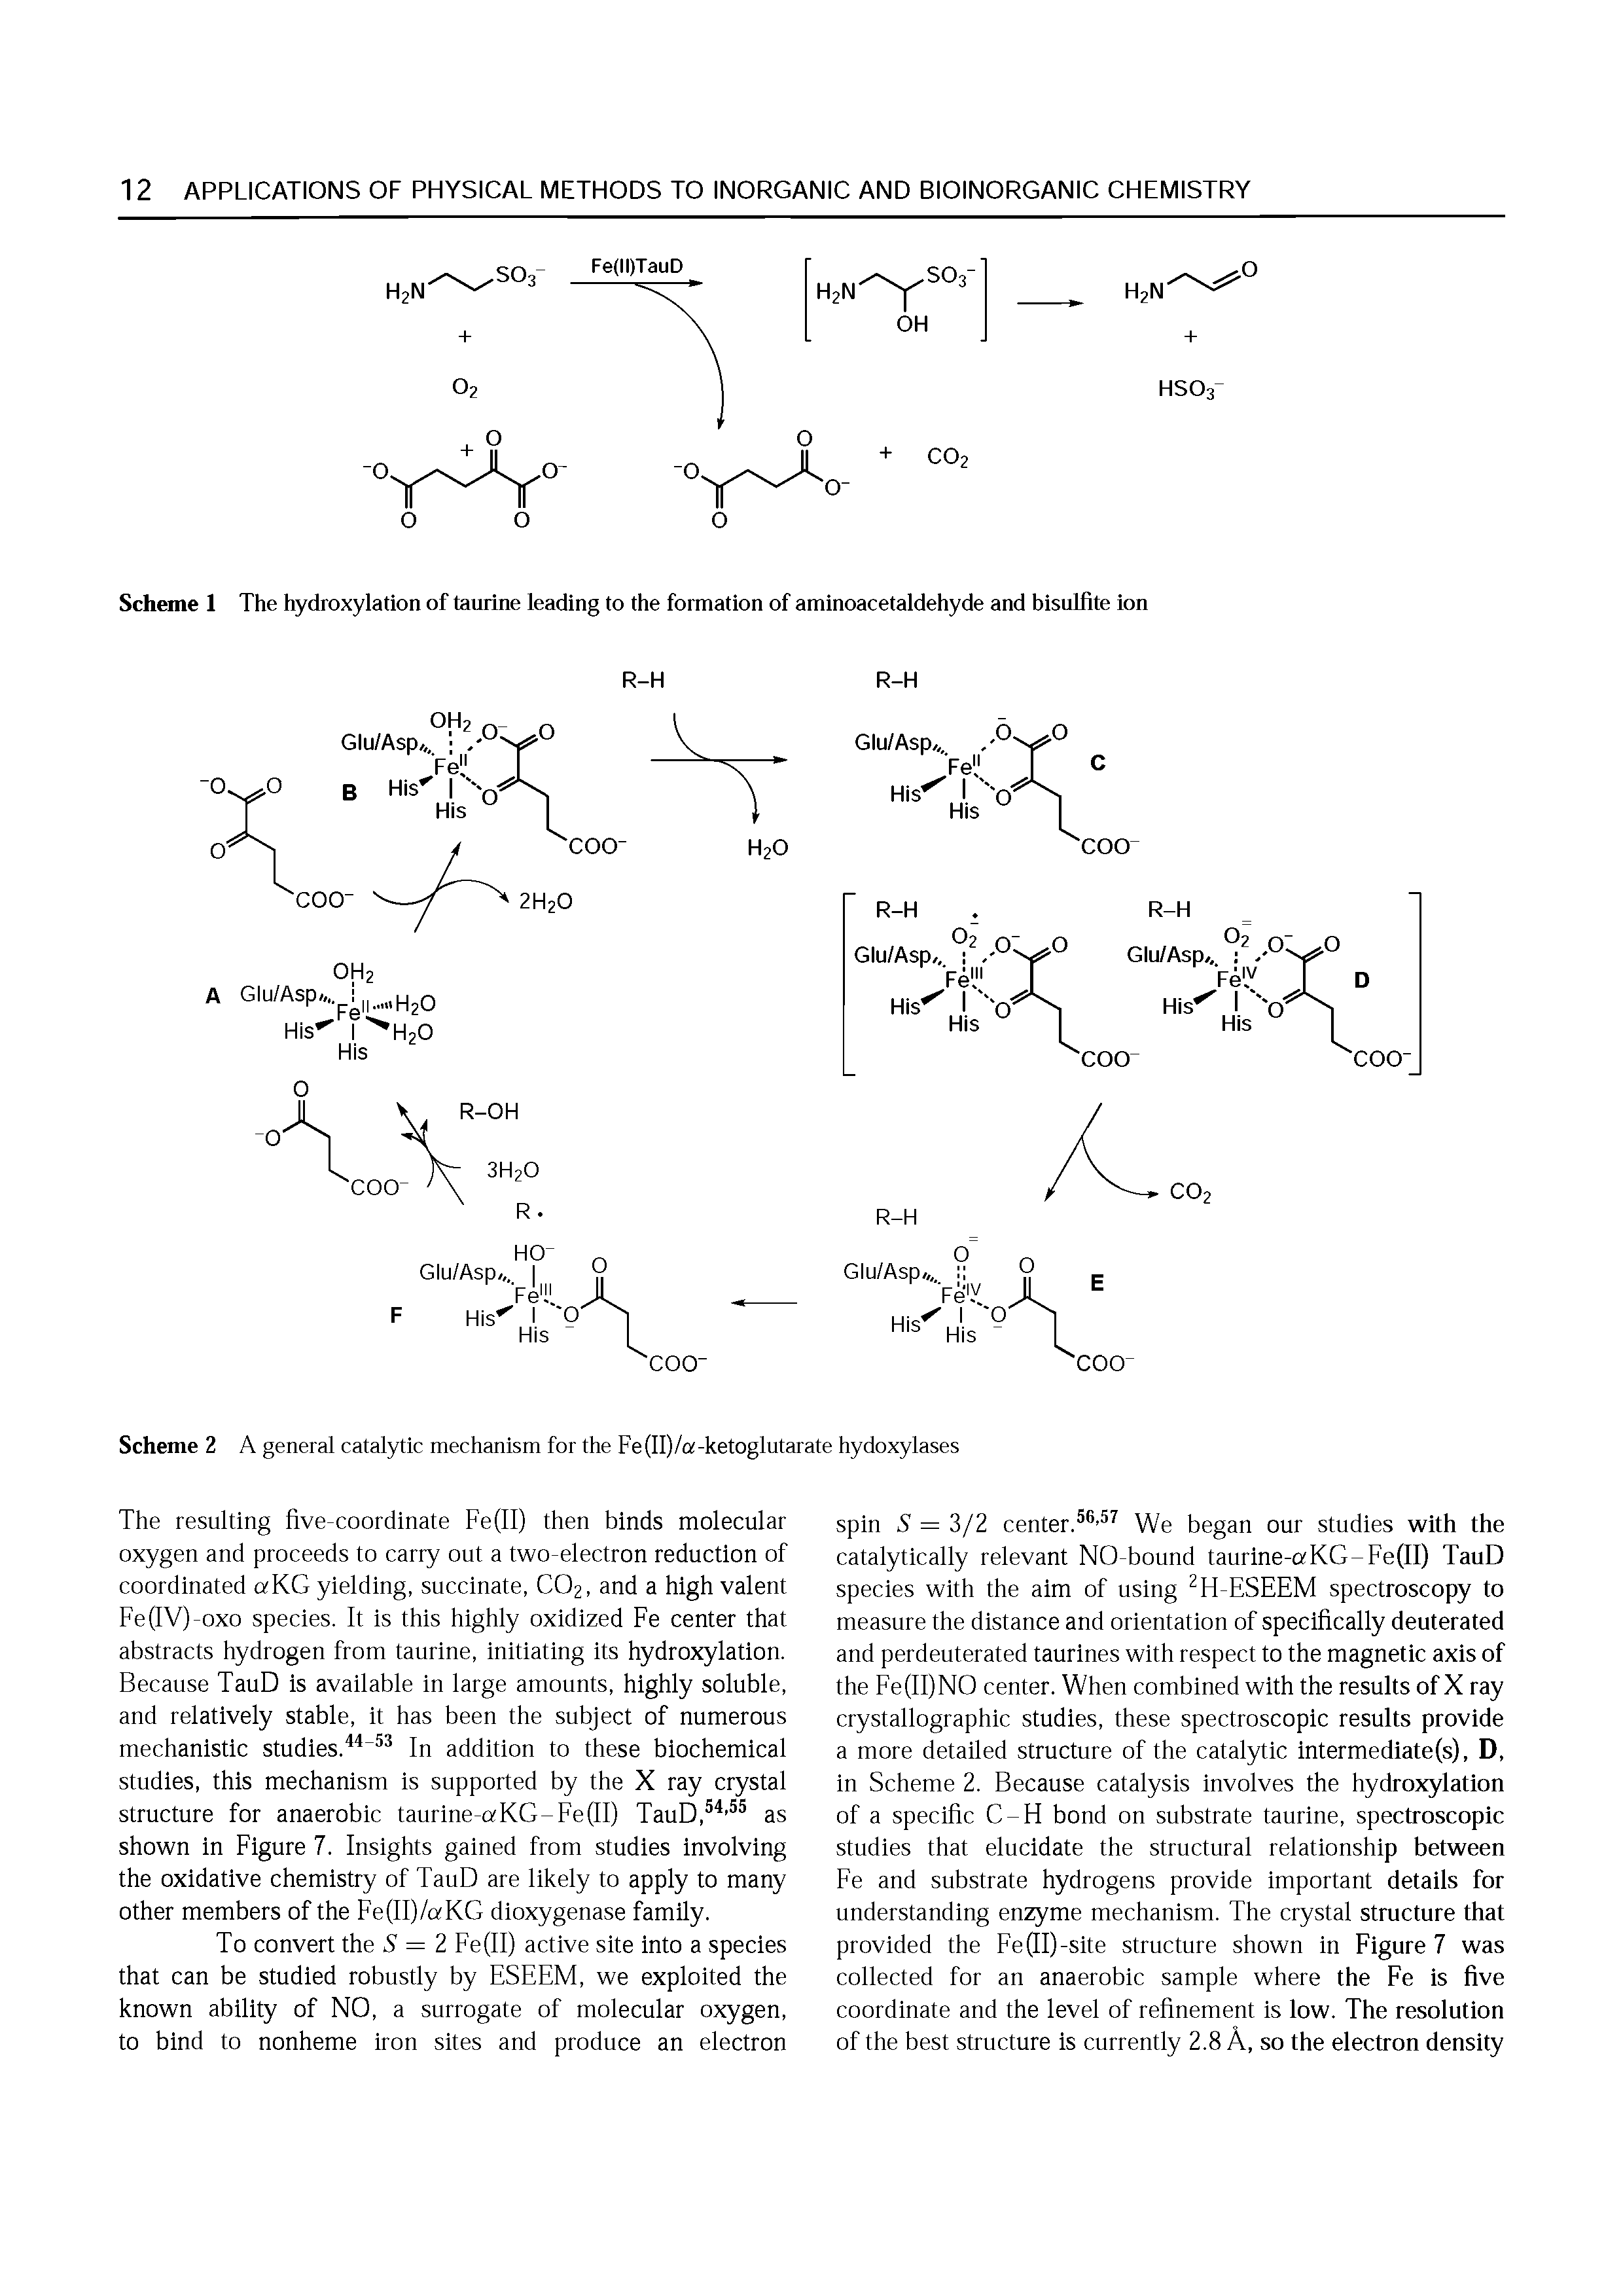 Scheme 2 A general catalytic mechanism for the Fe(II)/a-ketoglutarate hydoxylases...